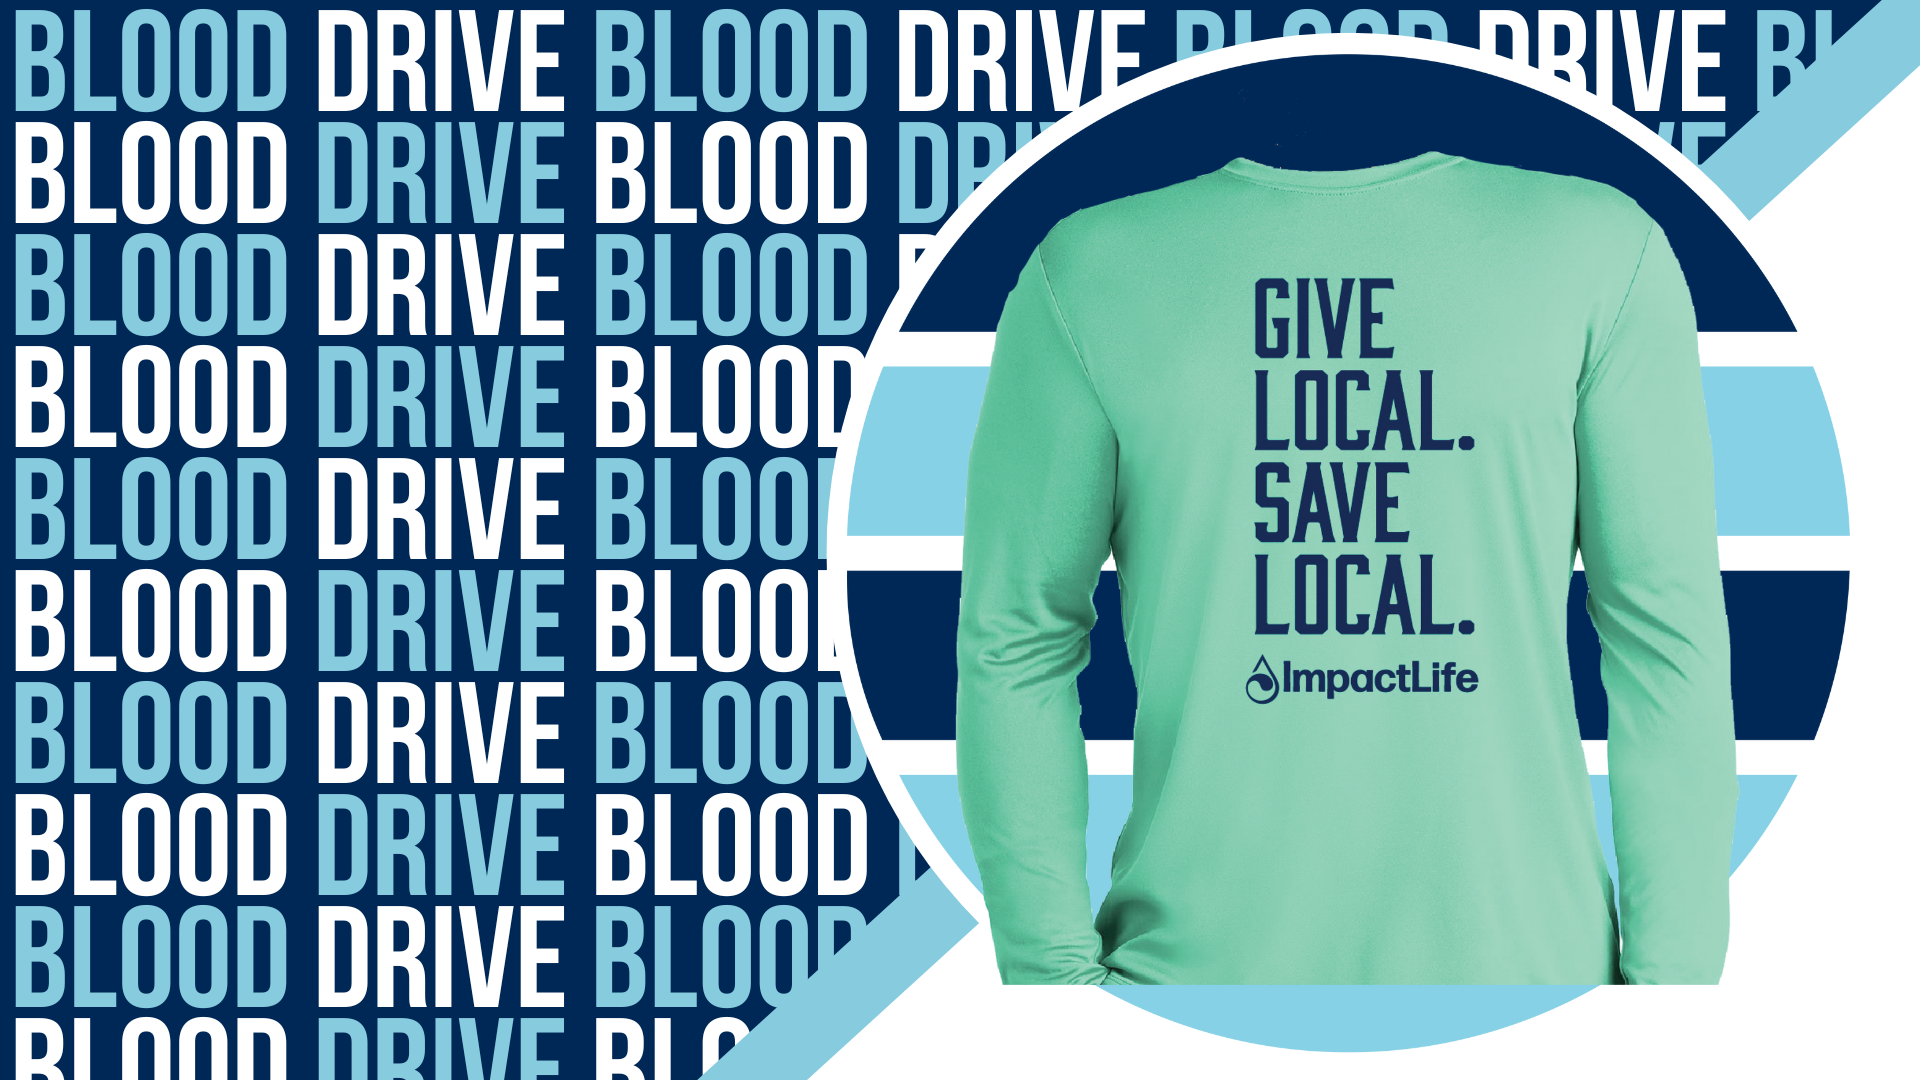 Background text in blue and white repeating "Blood Drive" along with a photo of a green long-sleeve t-shirt with the words "Give Local. Save Local. ImpactLife."